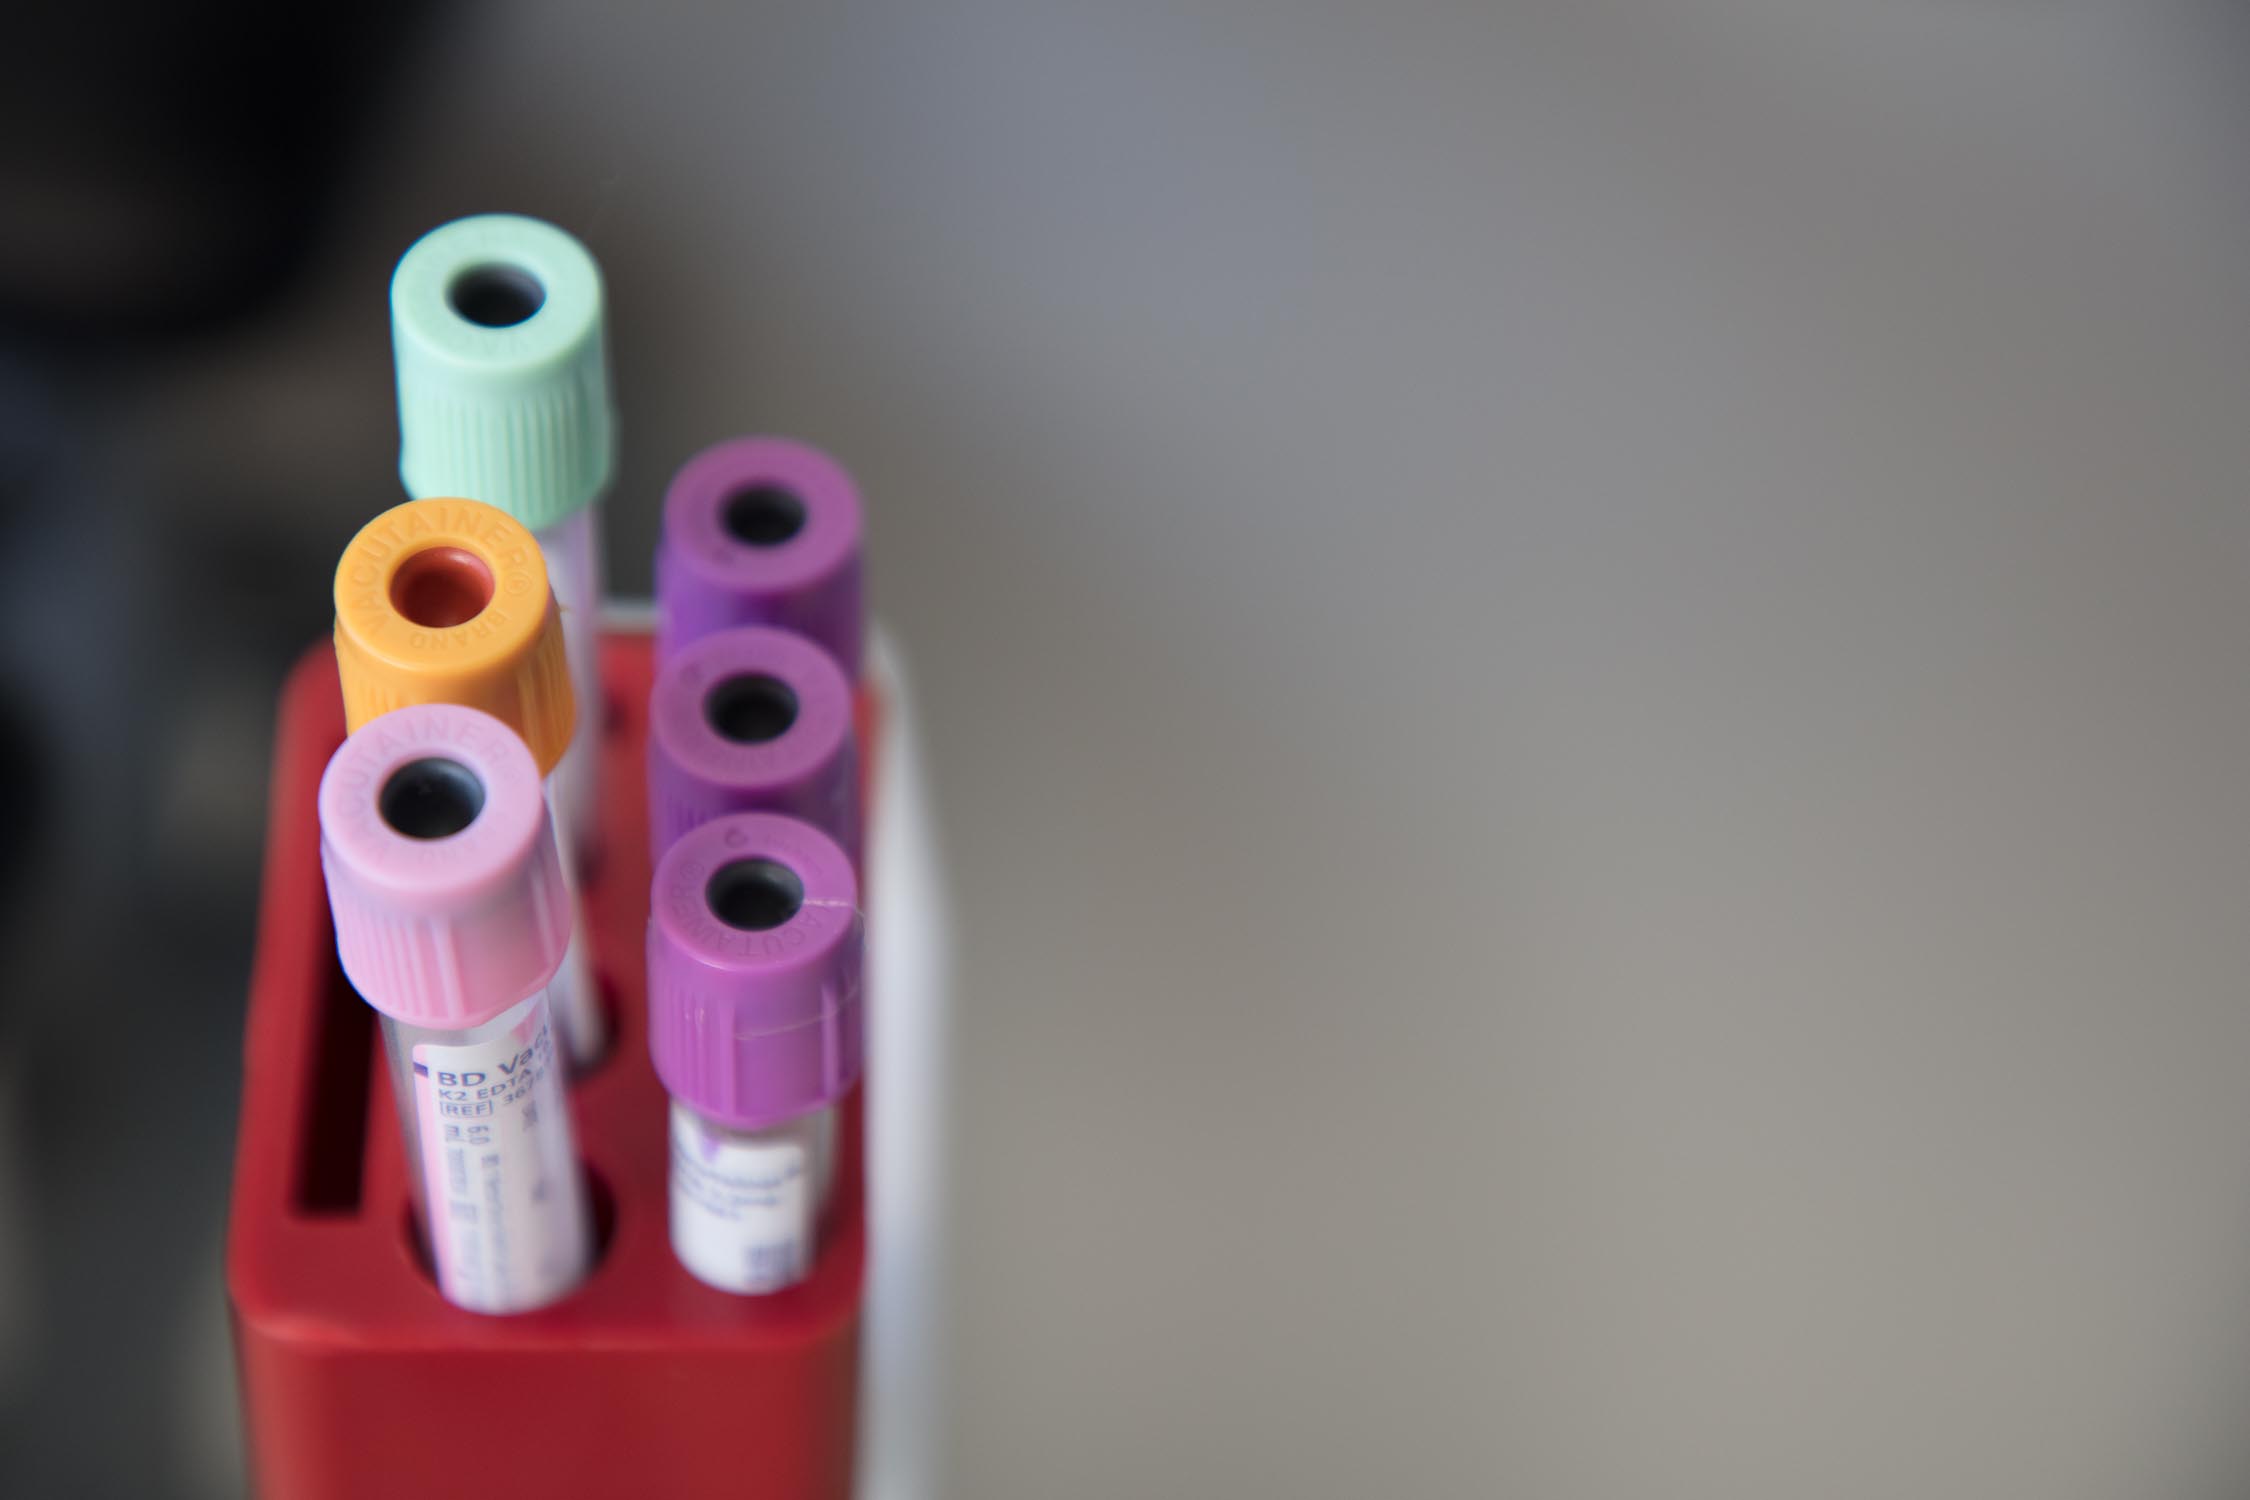 A blurred photograph of six labelled vials of various sizes and lid colors in a red holder.